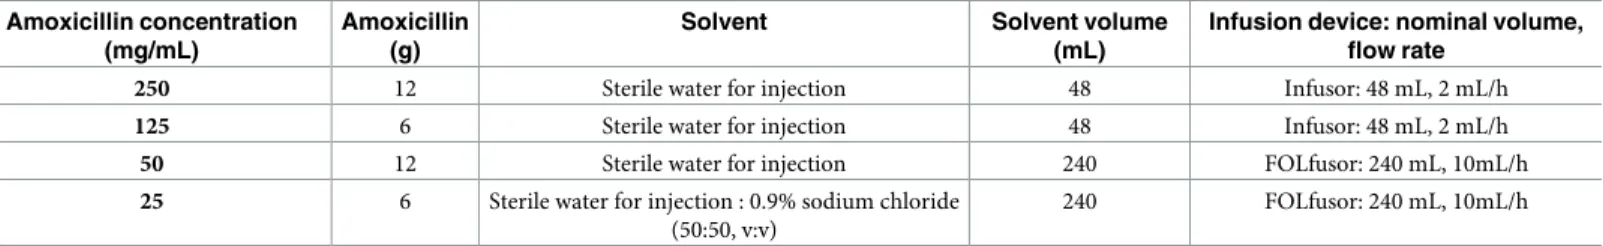 Table 1. Amoxicillin solutions prepared to investigate the influence of concentration on the chemical stability of amoxicillin.